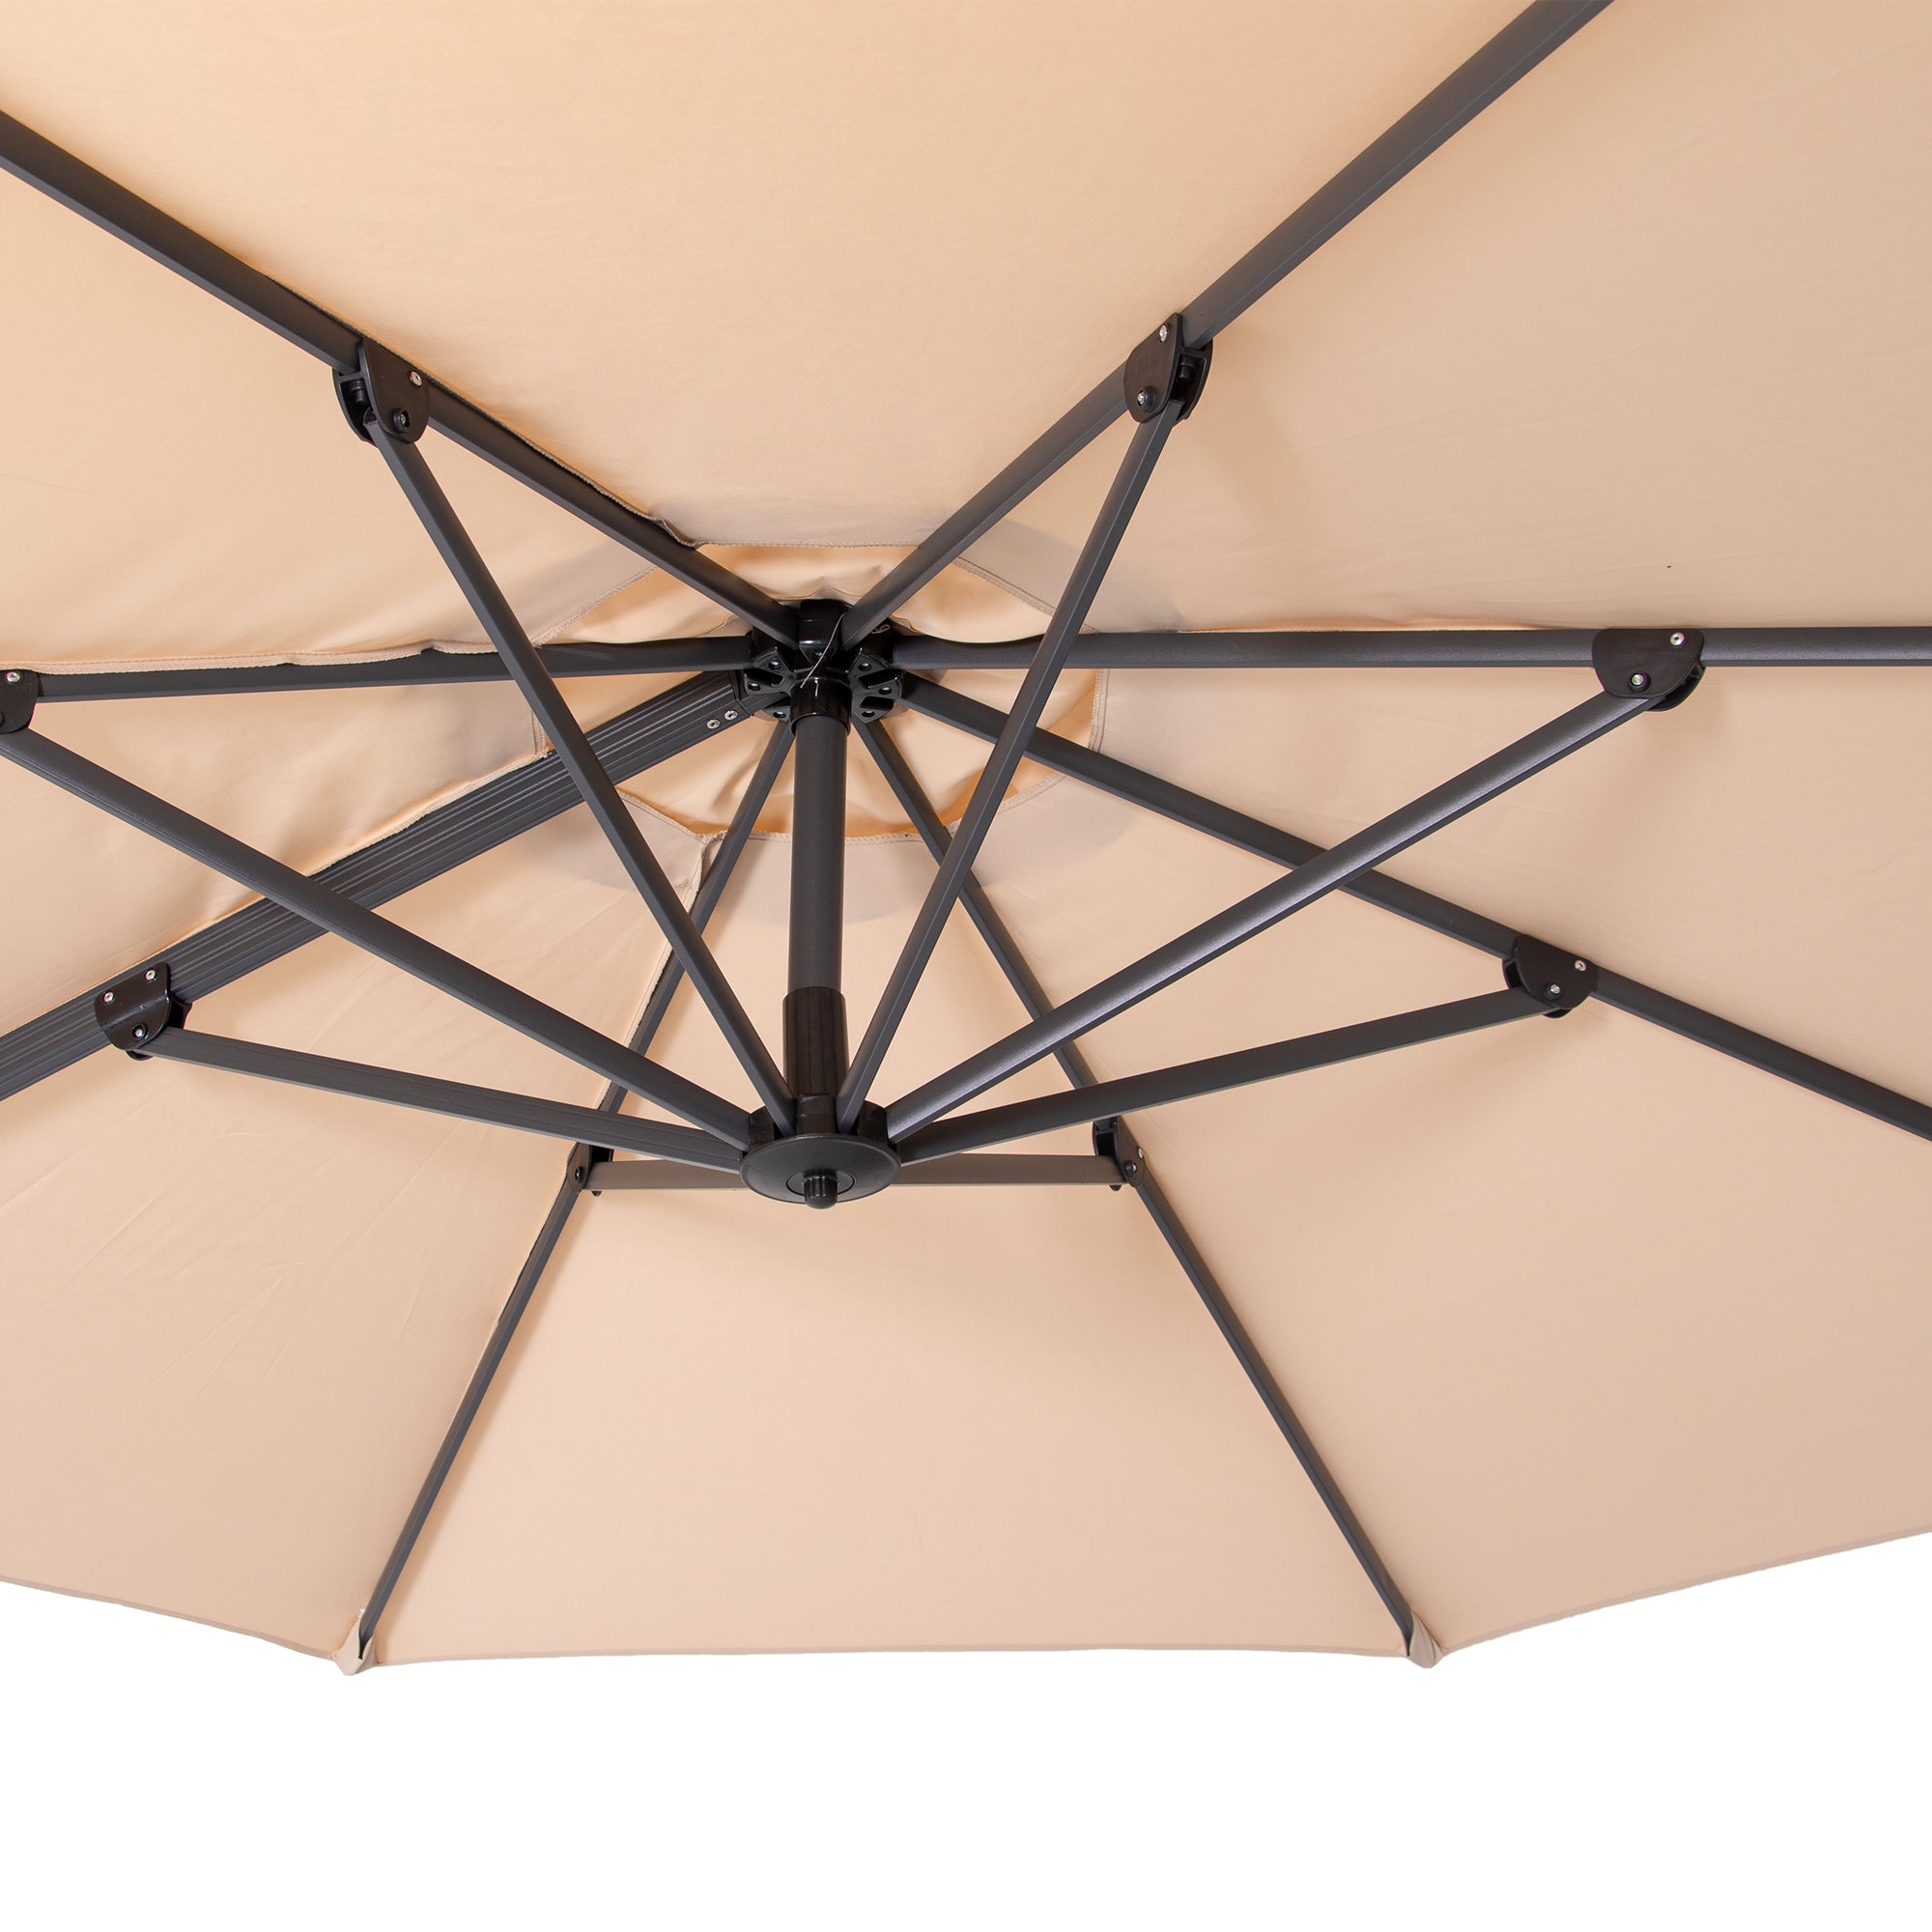 10' Tan Polyester Round Tilt Cantilever Patio Umbrella With Stand